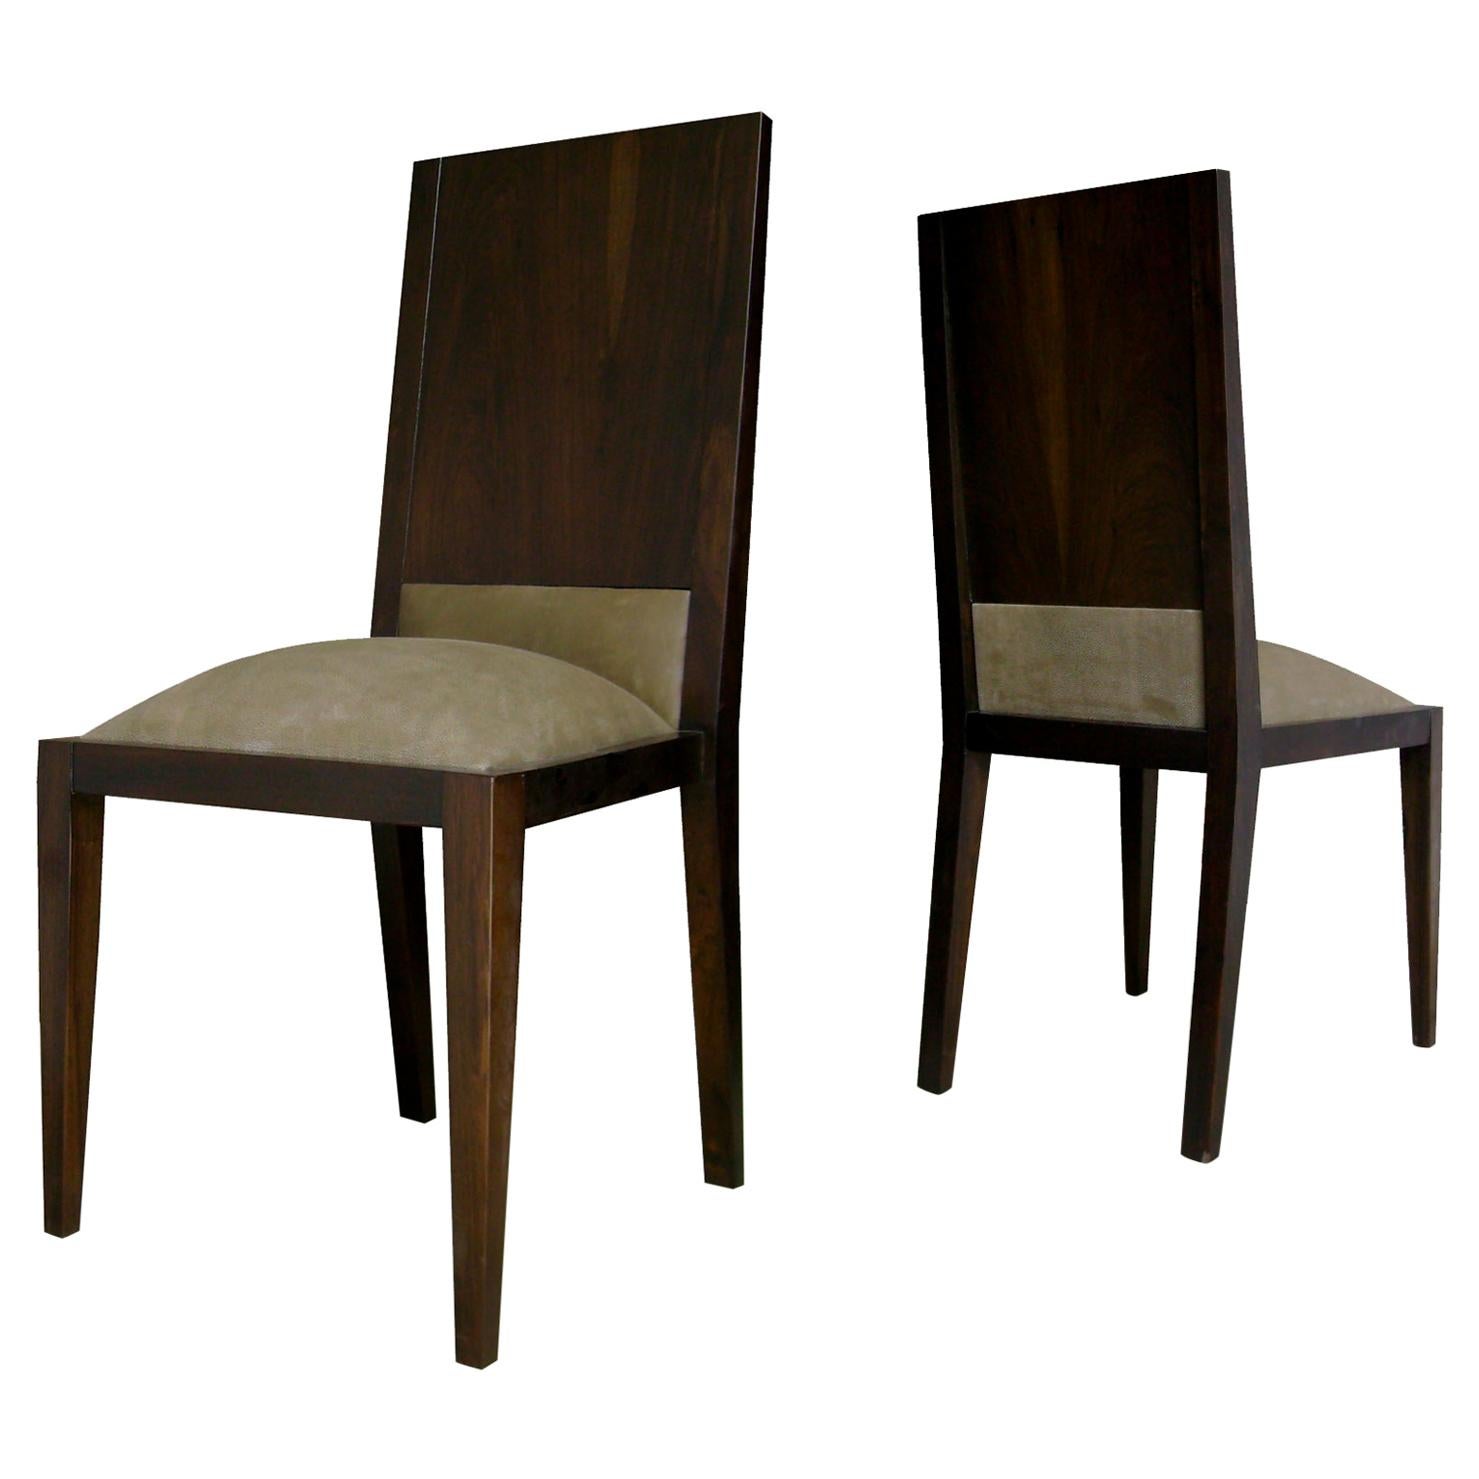 Palermo Dining Chair in Argentine Rosewood Leather from Costantini